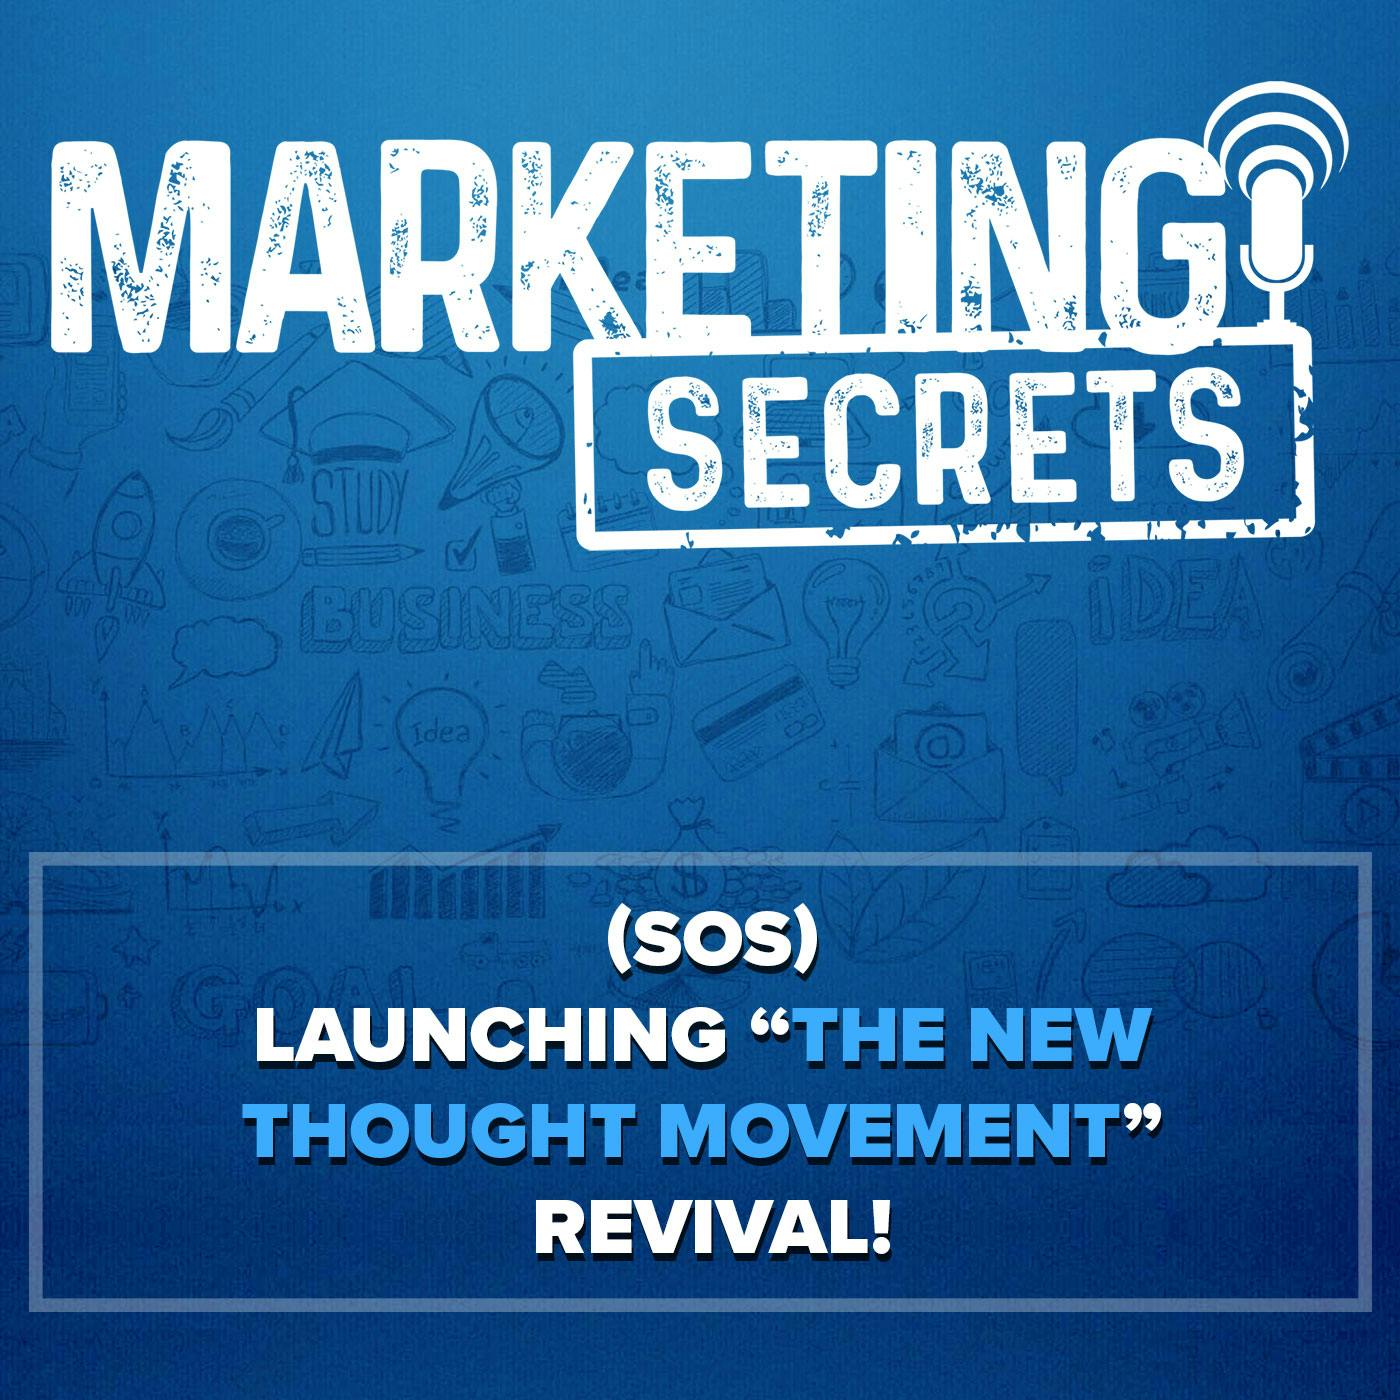 (SOS) Launching "The New Thought Movement" Revival!